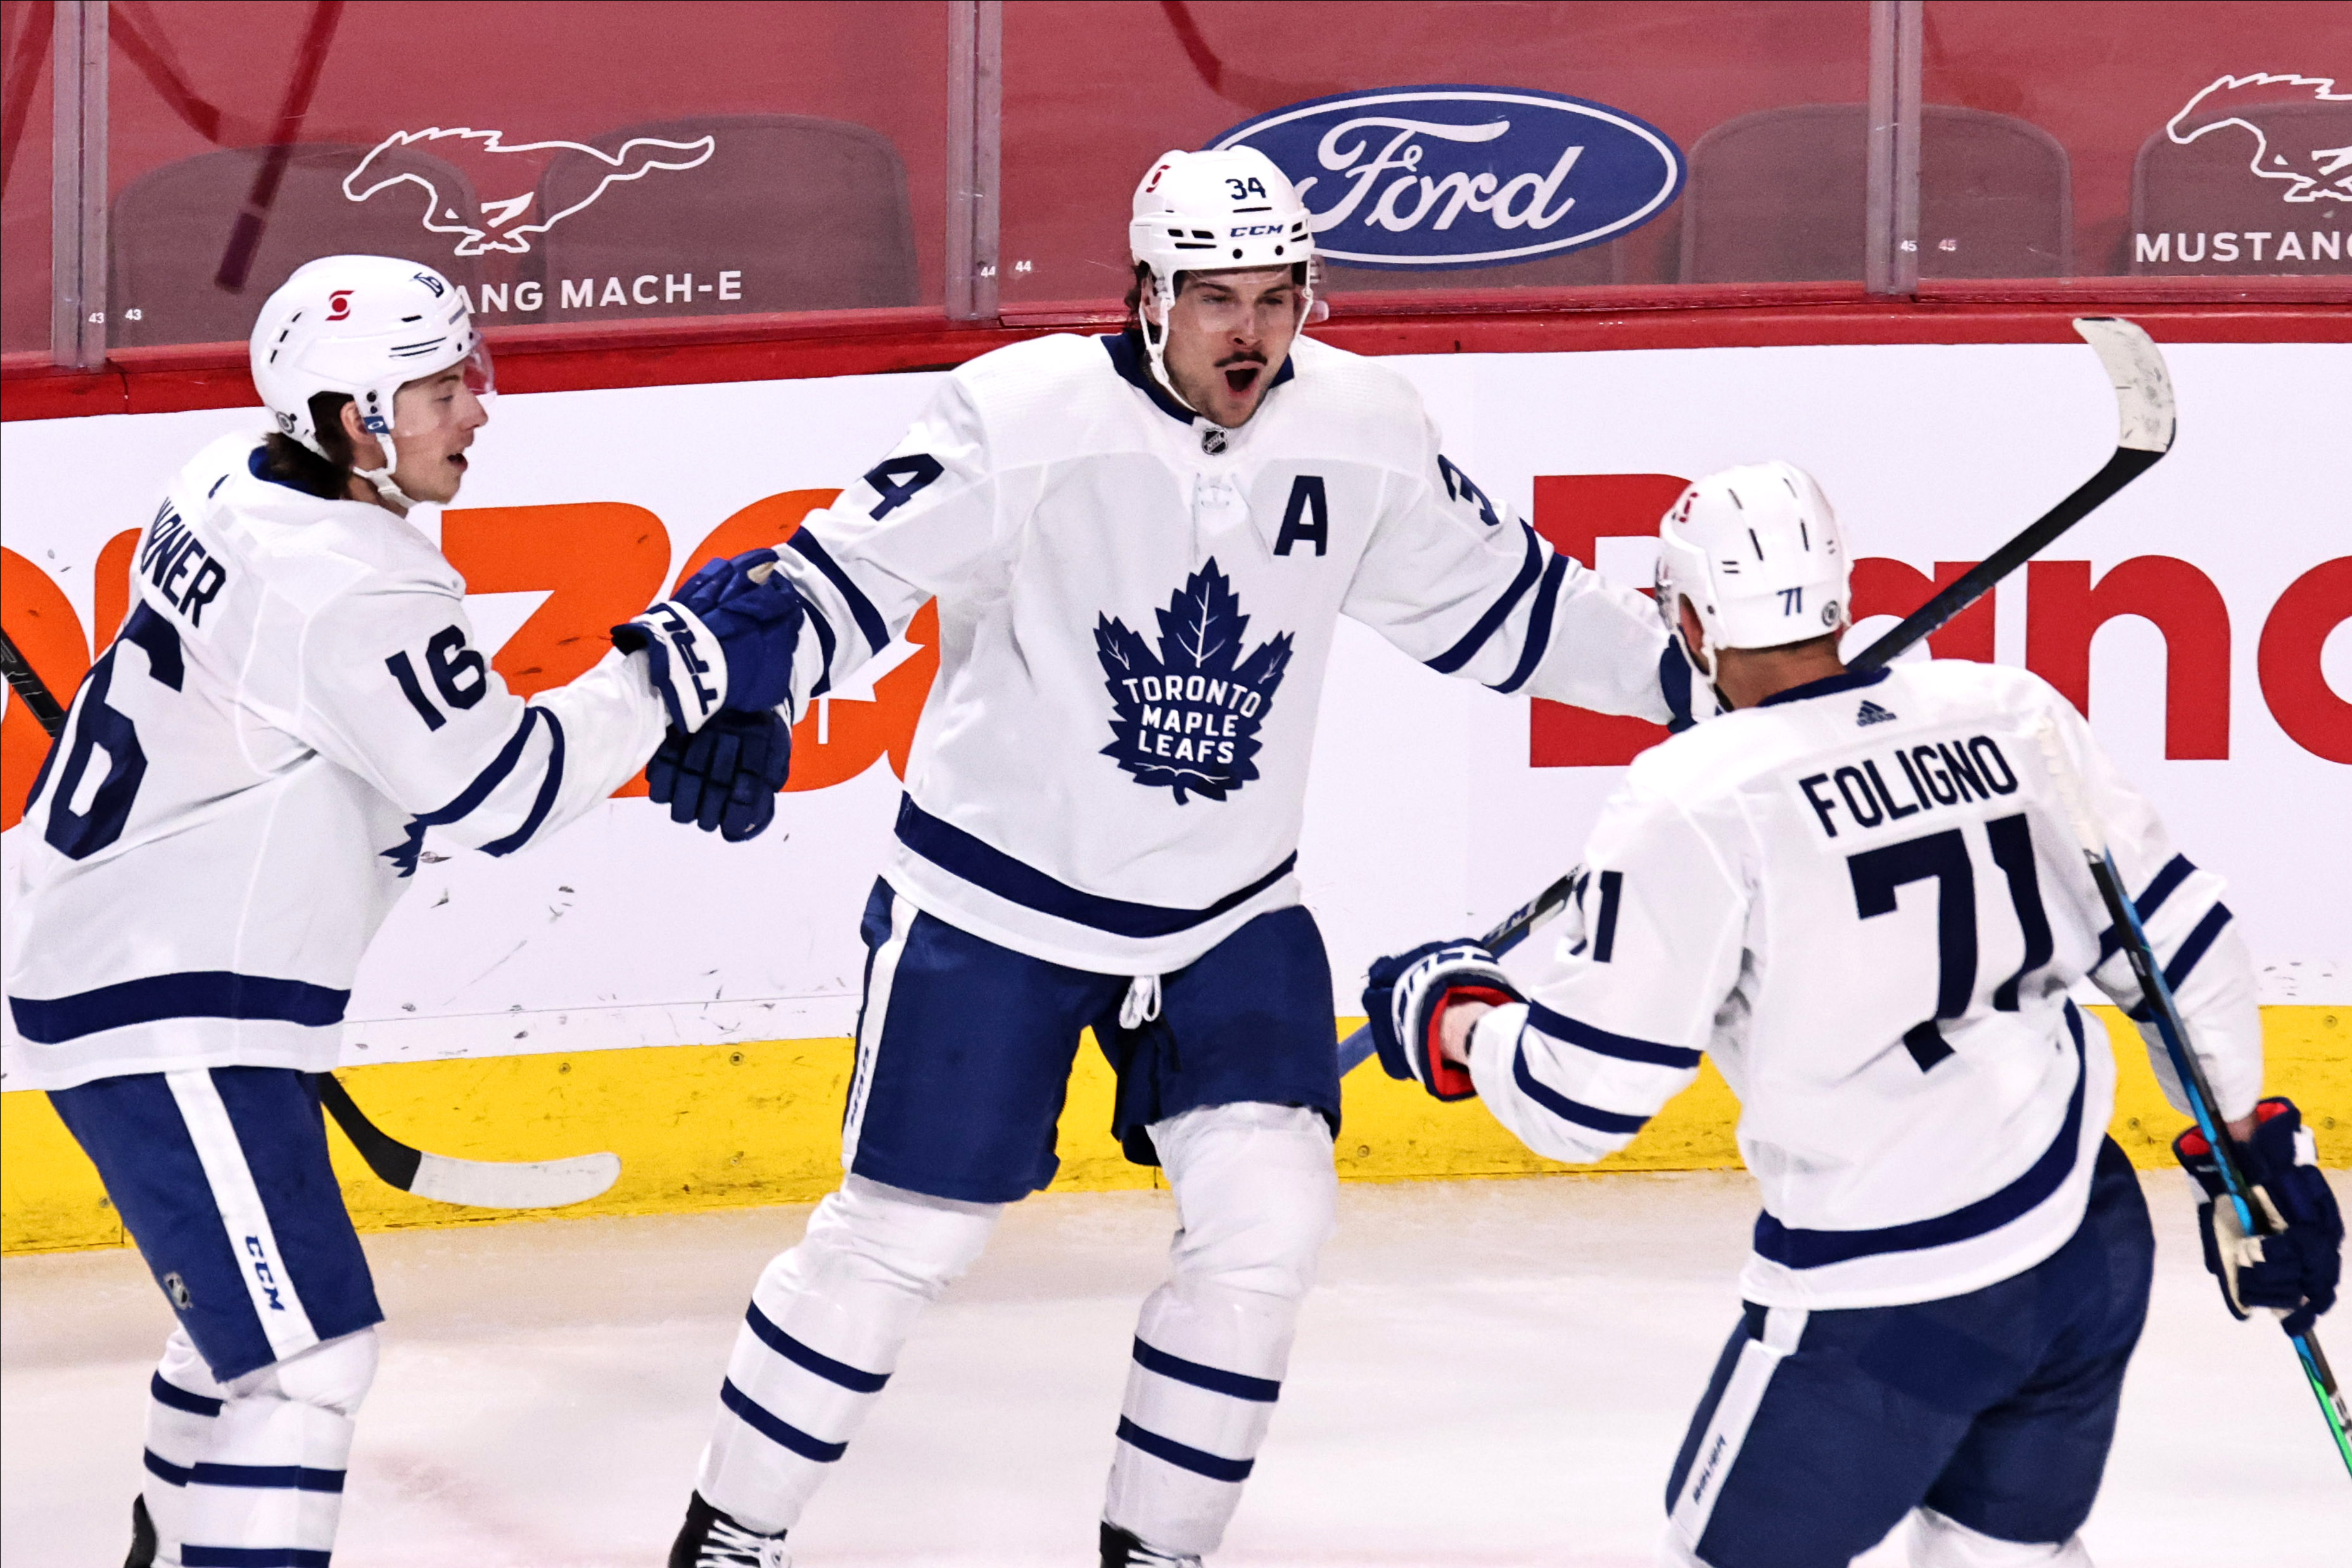 Toronto Maple Leafs clinch playoffs Montreal Canadiens 